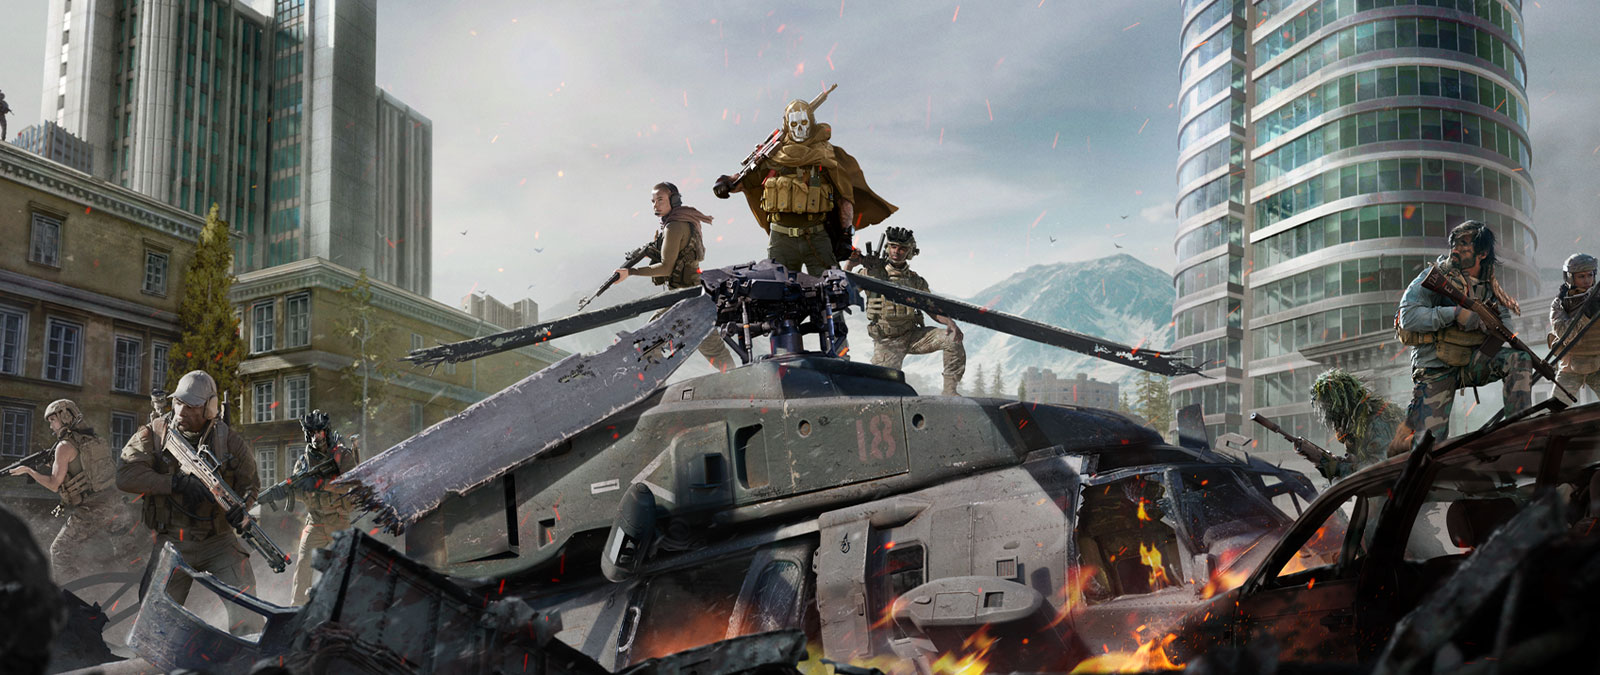 Ghost from Call of Duty: Modern Warfare in skull mask and stealth gear on top of a crashed helicopter with several other characters